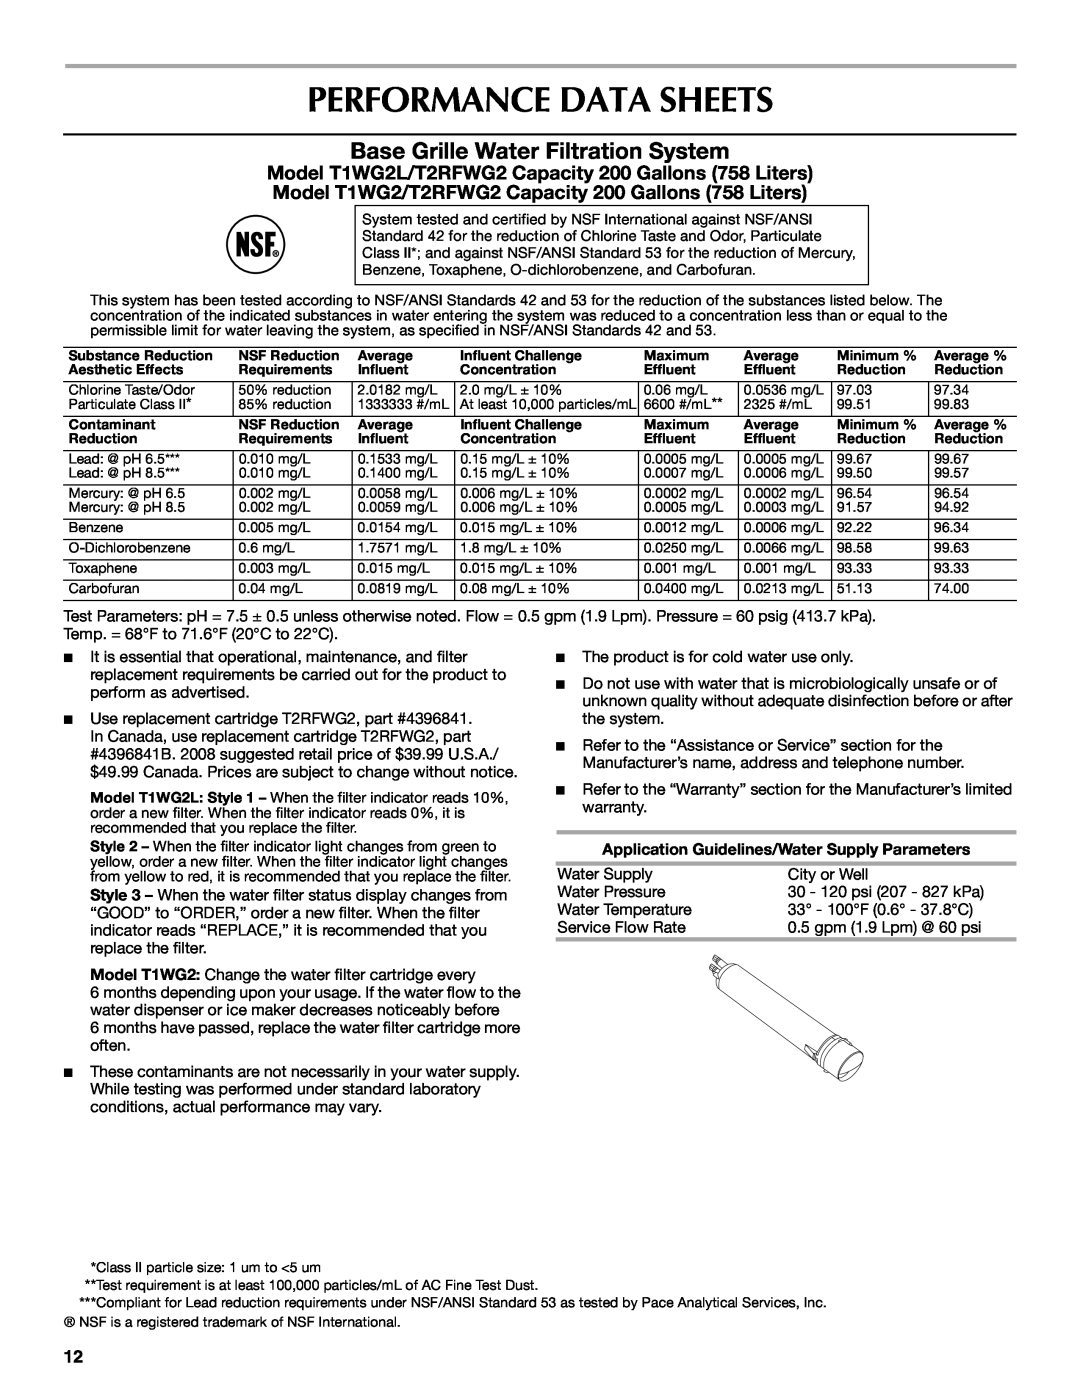 Maytag MSD2254VEW installation instructions Performance Data Sheets, Base Grille Water Filtration System 